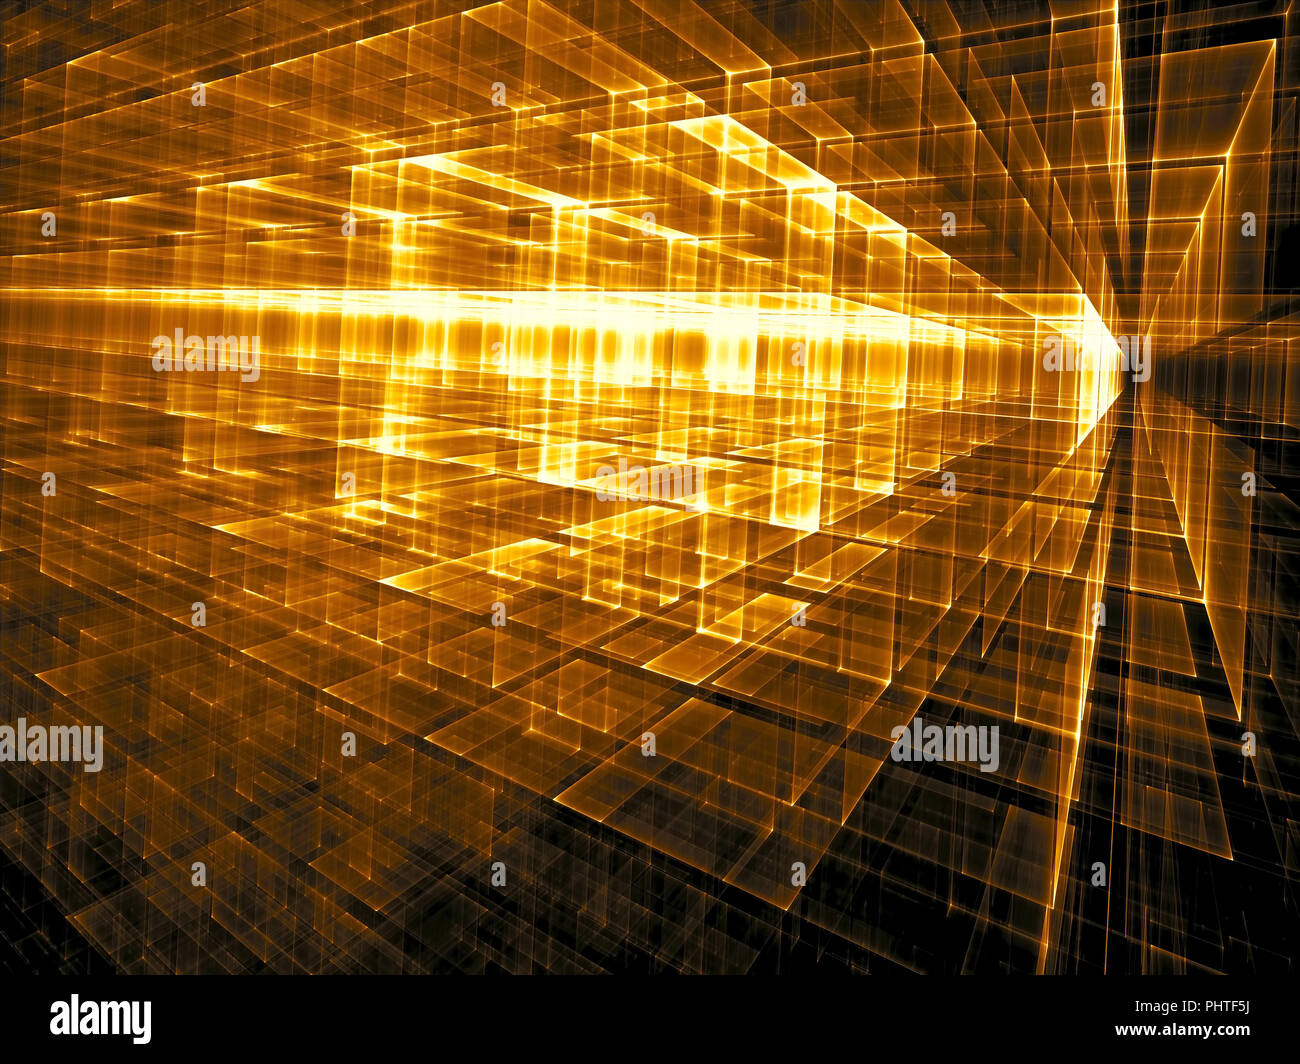 Abstract technology or sci-fi background - digitally generated i Stock Photo